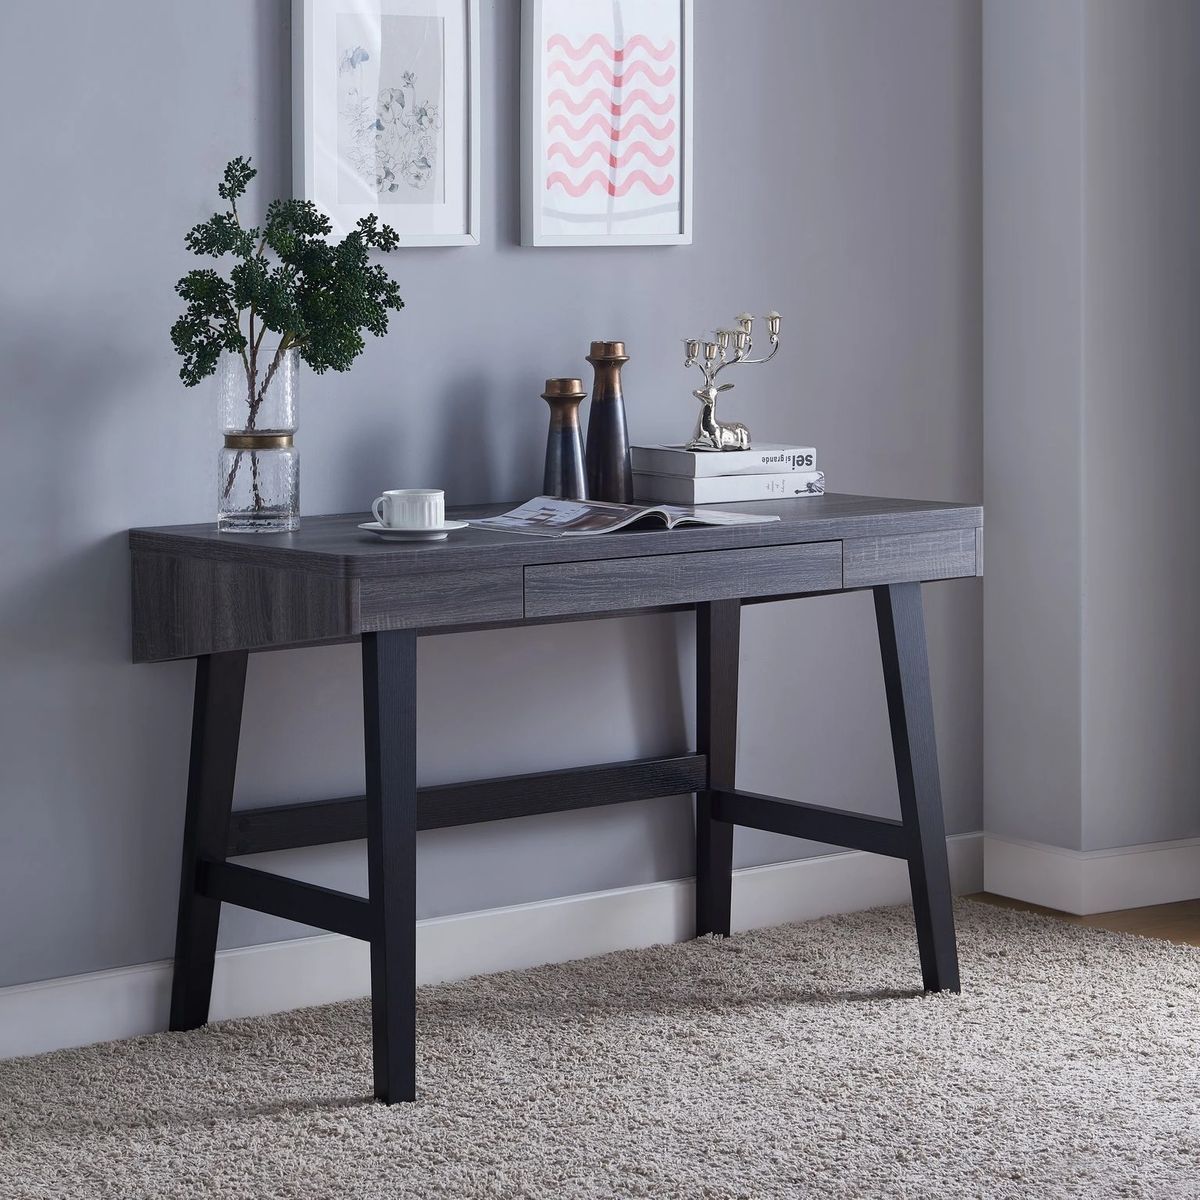 Fc Design Two Tone Writing Desk With One Center Drawer And Two Usb With Black And Gray Oval Writing Desks (View 11 of 15)